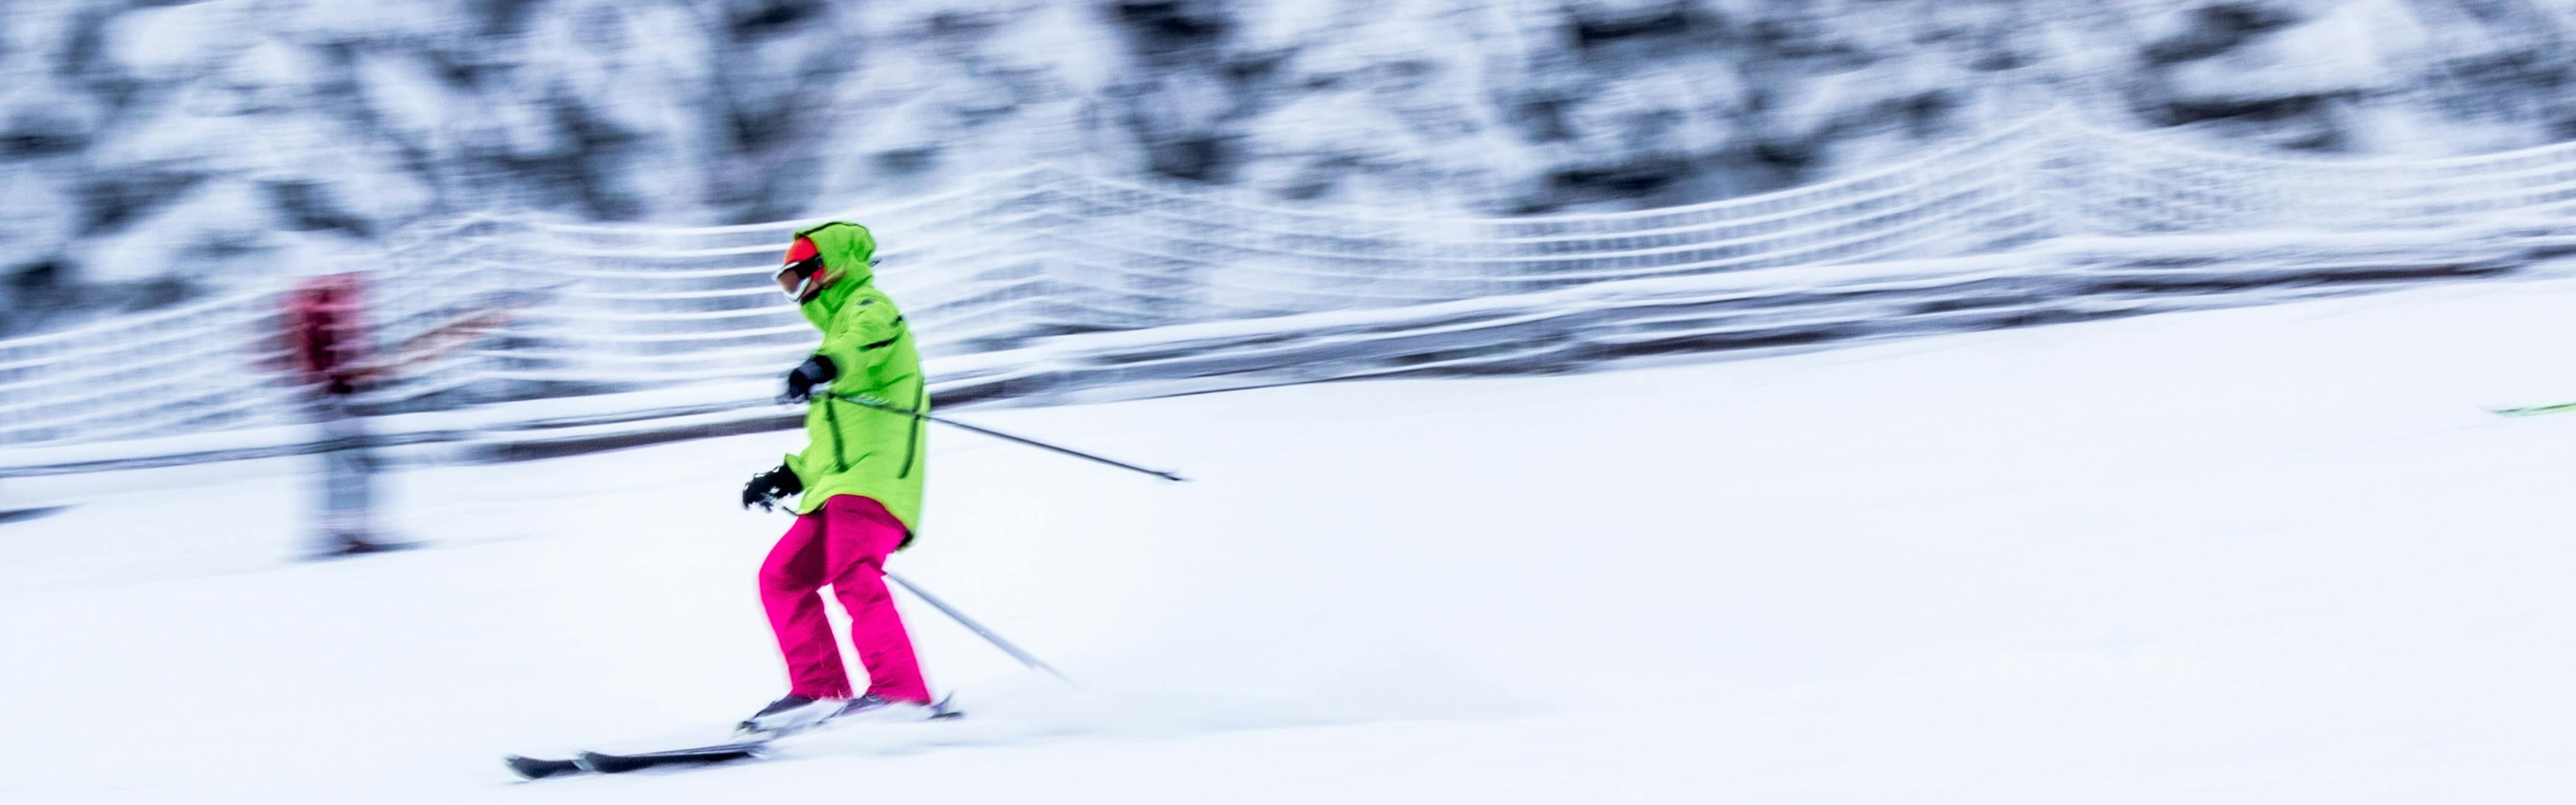 Skier zooming down the frosty white slope in a neon green jacket and hot pink ski pants.